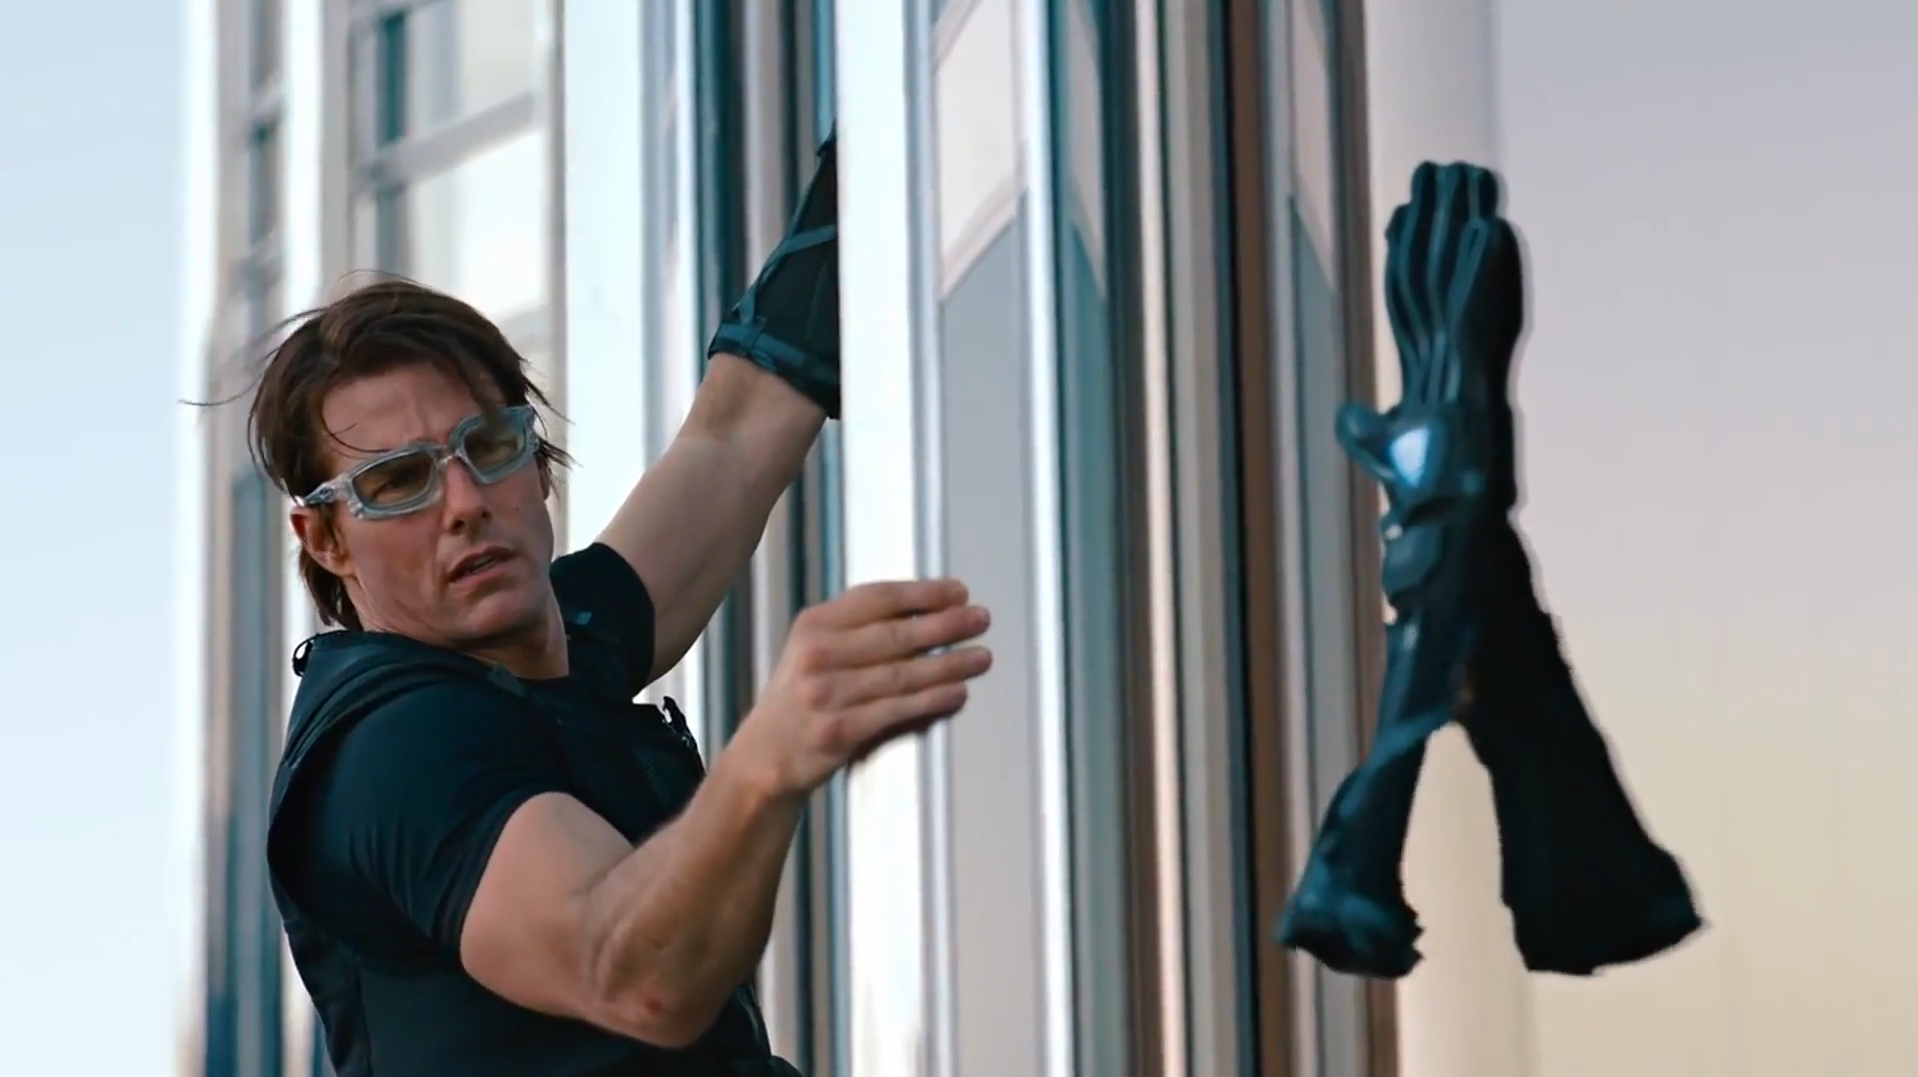 Tom Cruise did not allow the series "Mission Impossible" to be filmed.